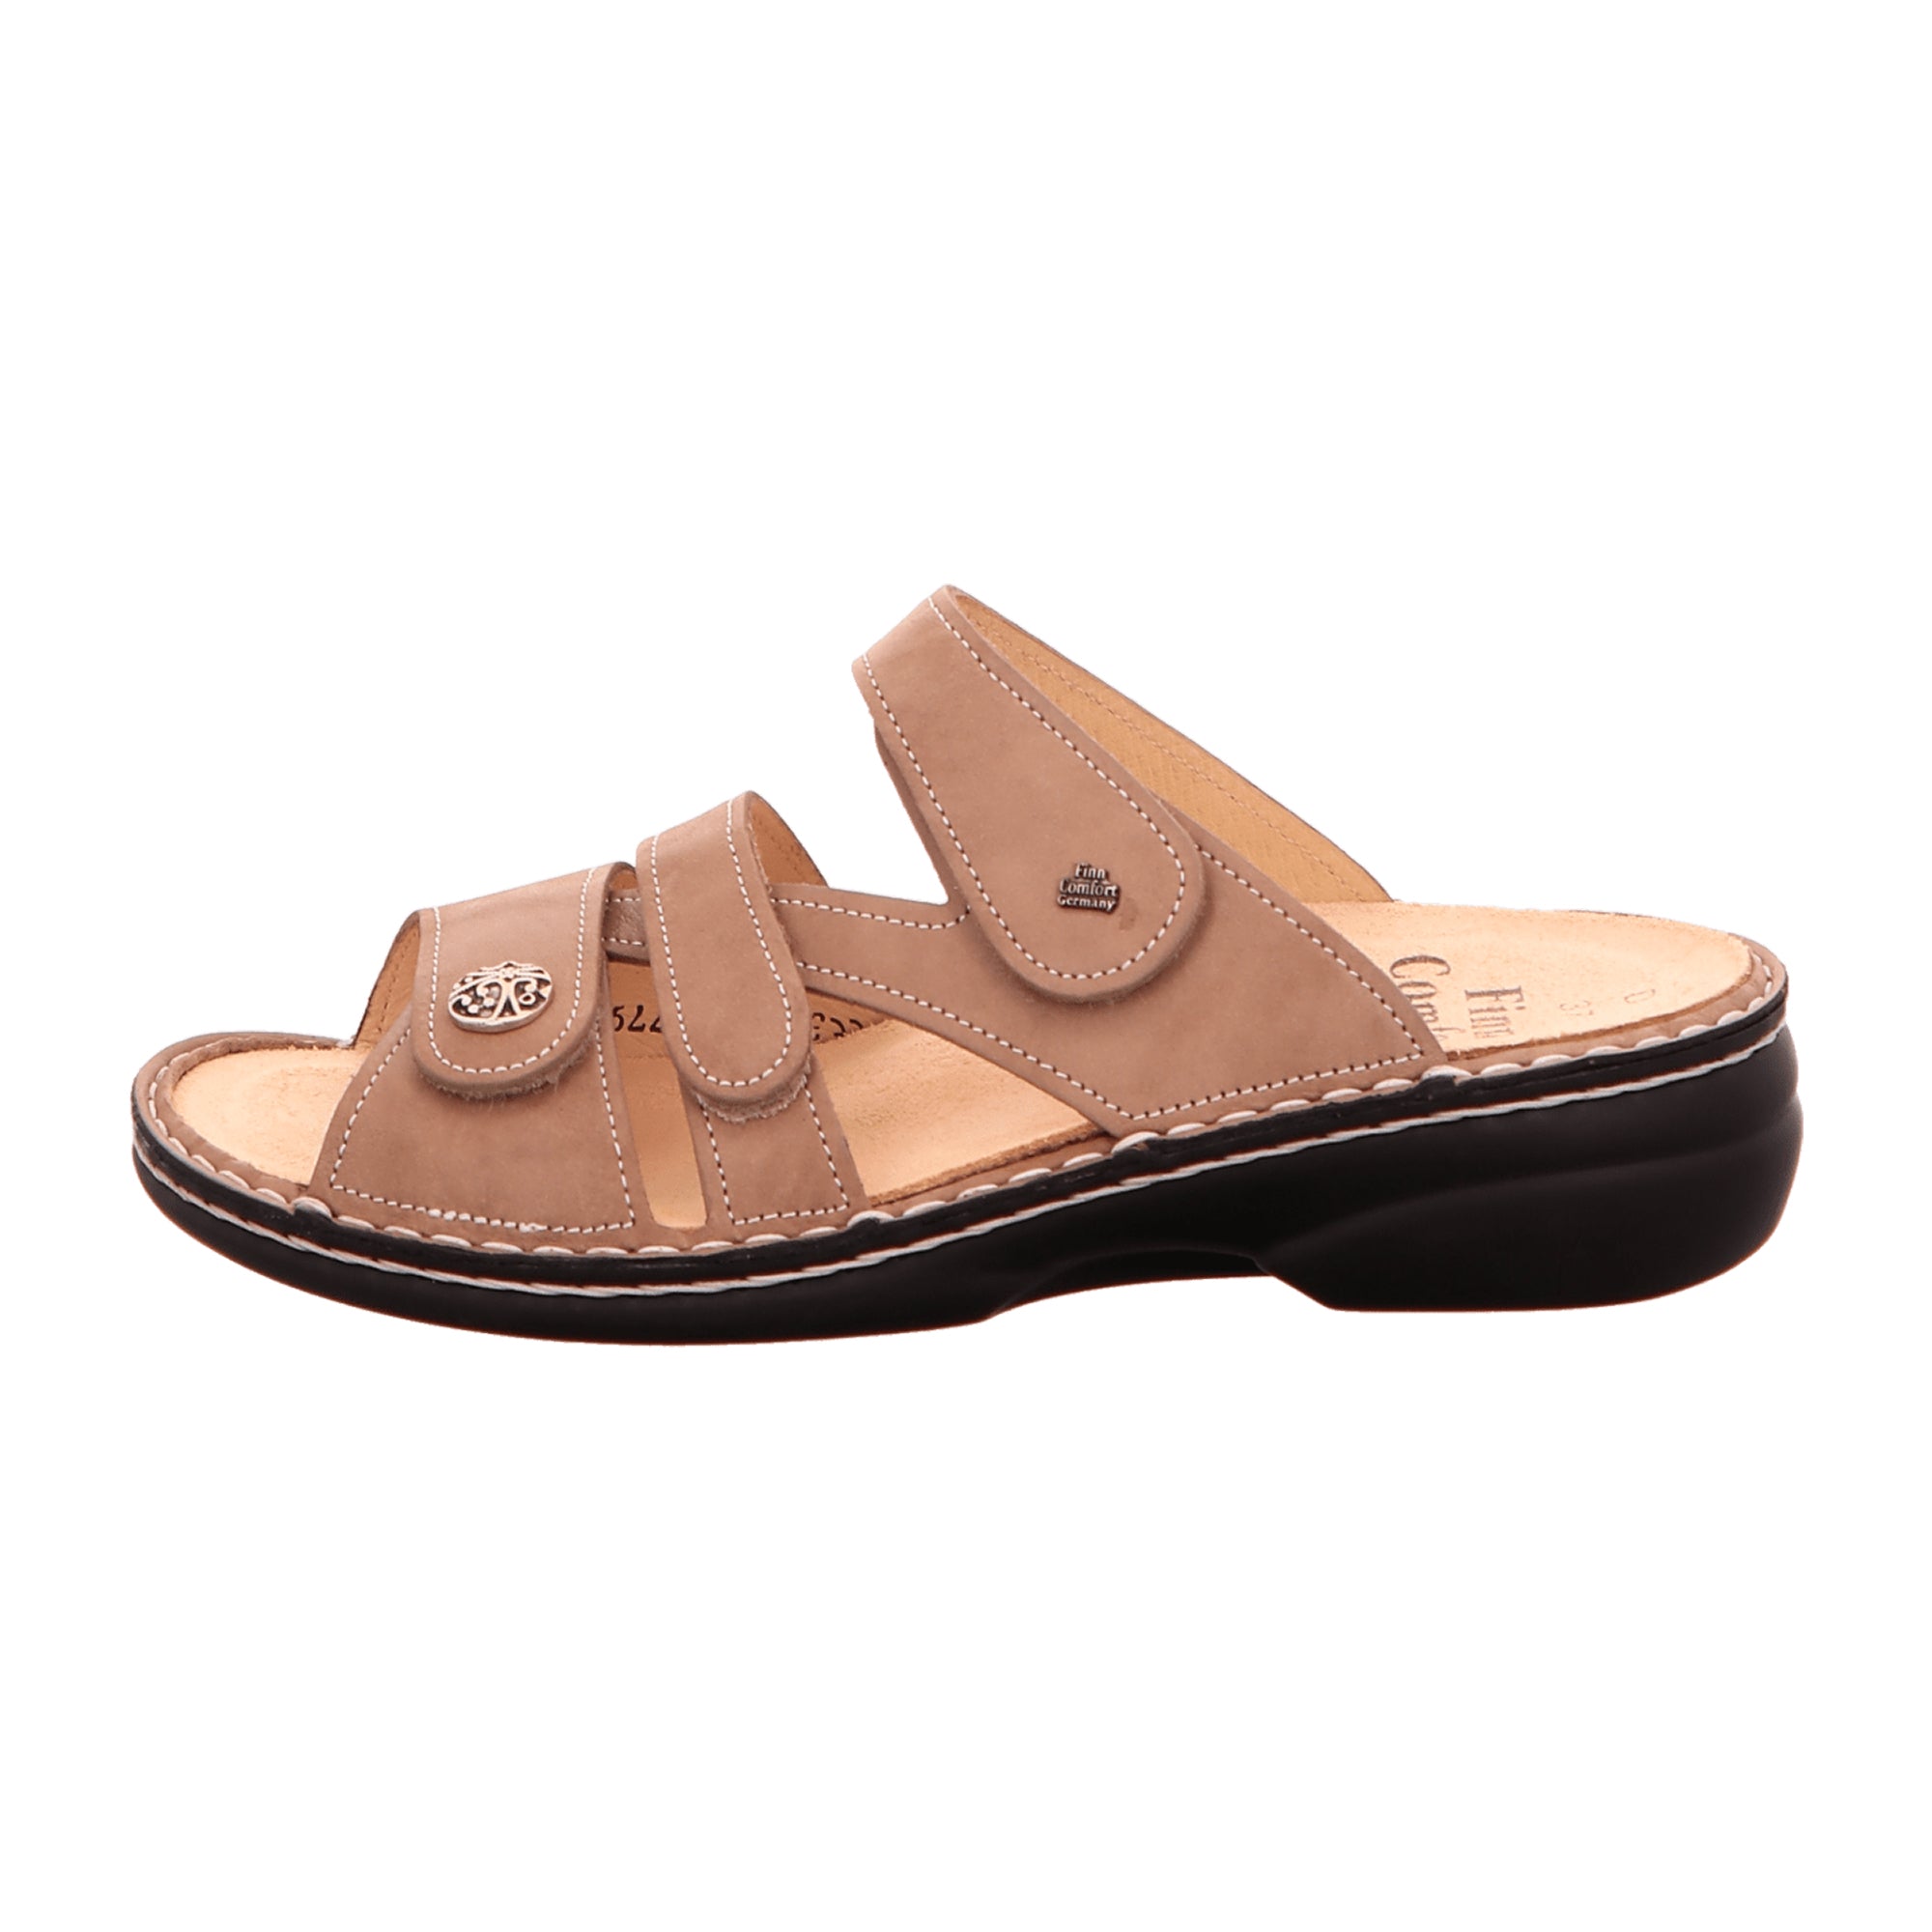 Finn Comfort Ventura-Soft Beige Sandals for Women - Comfortable Leather Slides with Adjustable Straps and Removable Insoles